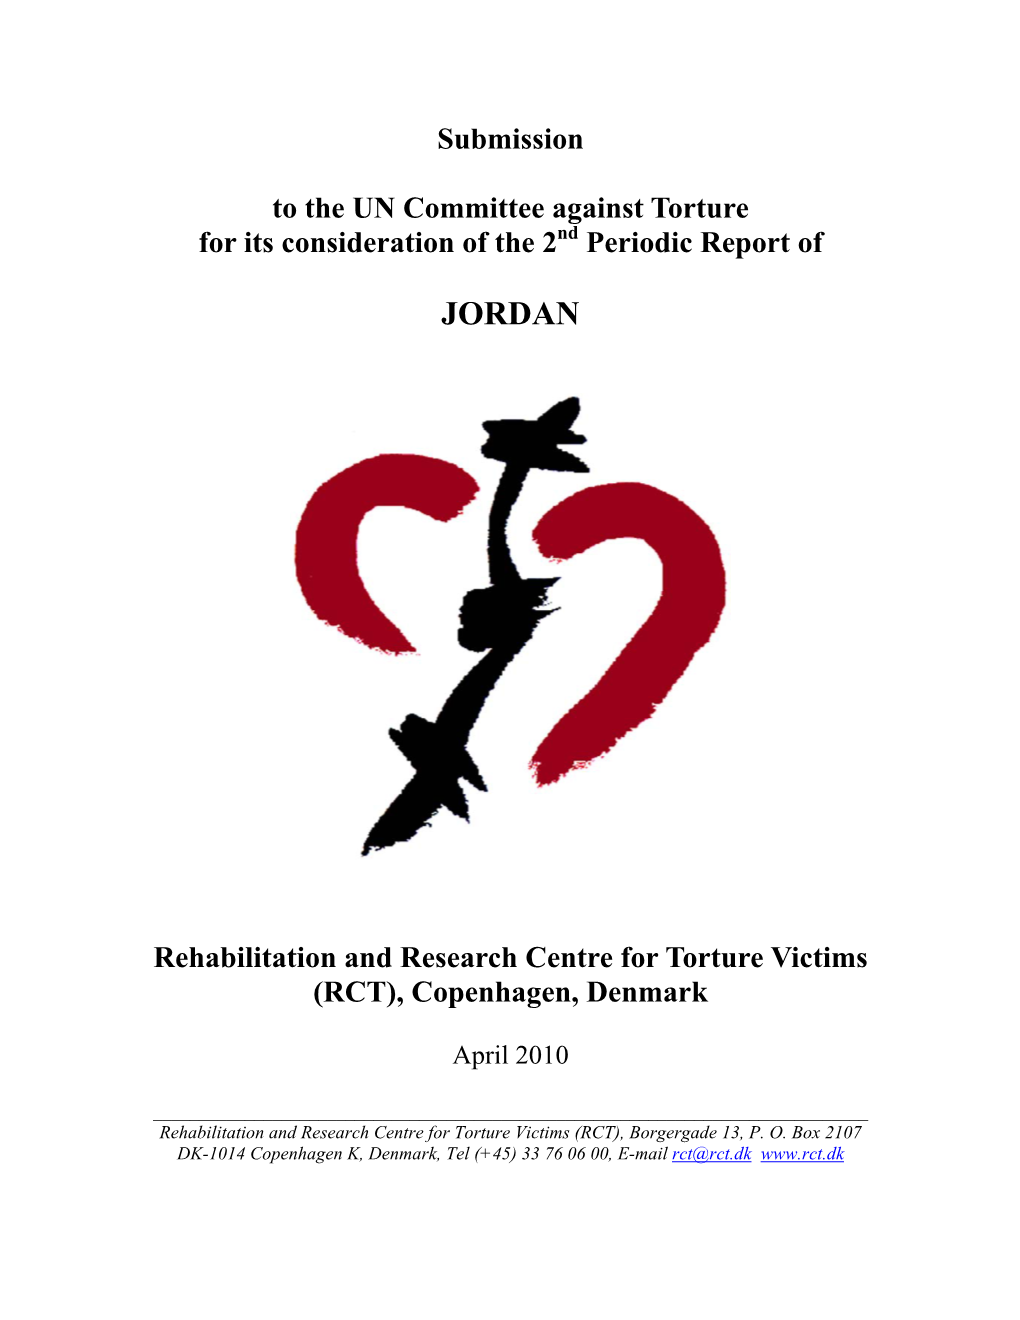 Submission to the UN Committee Against Torture for Its Consideration